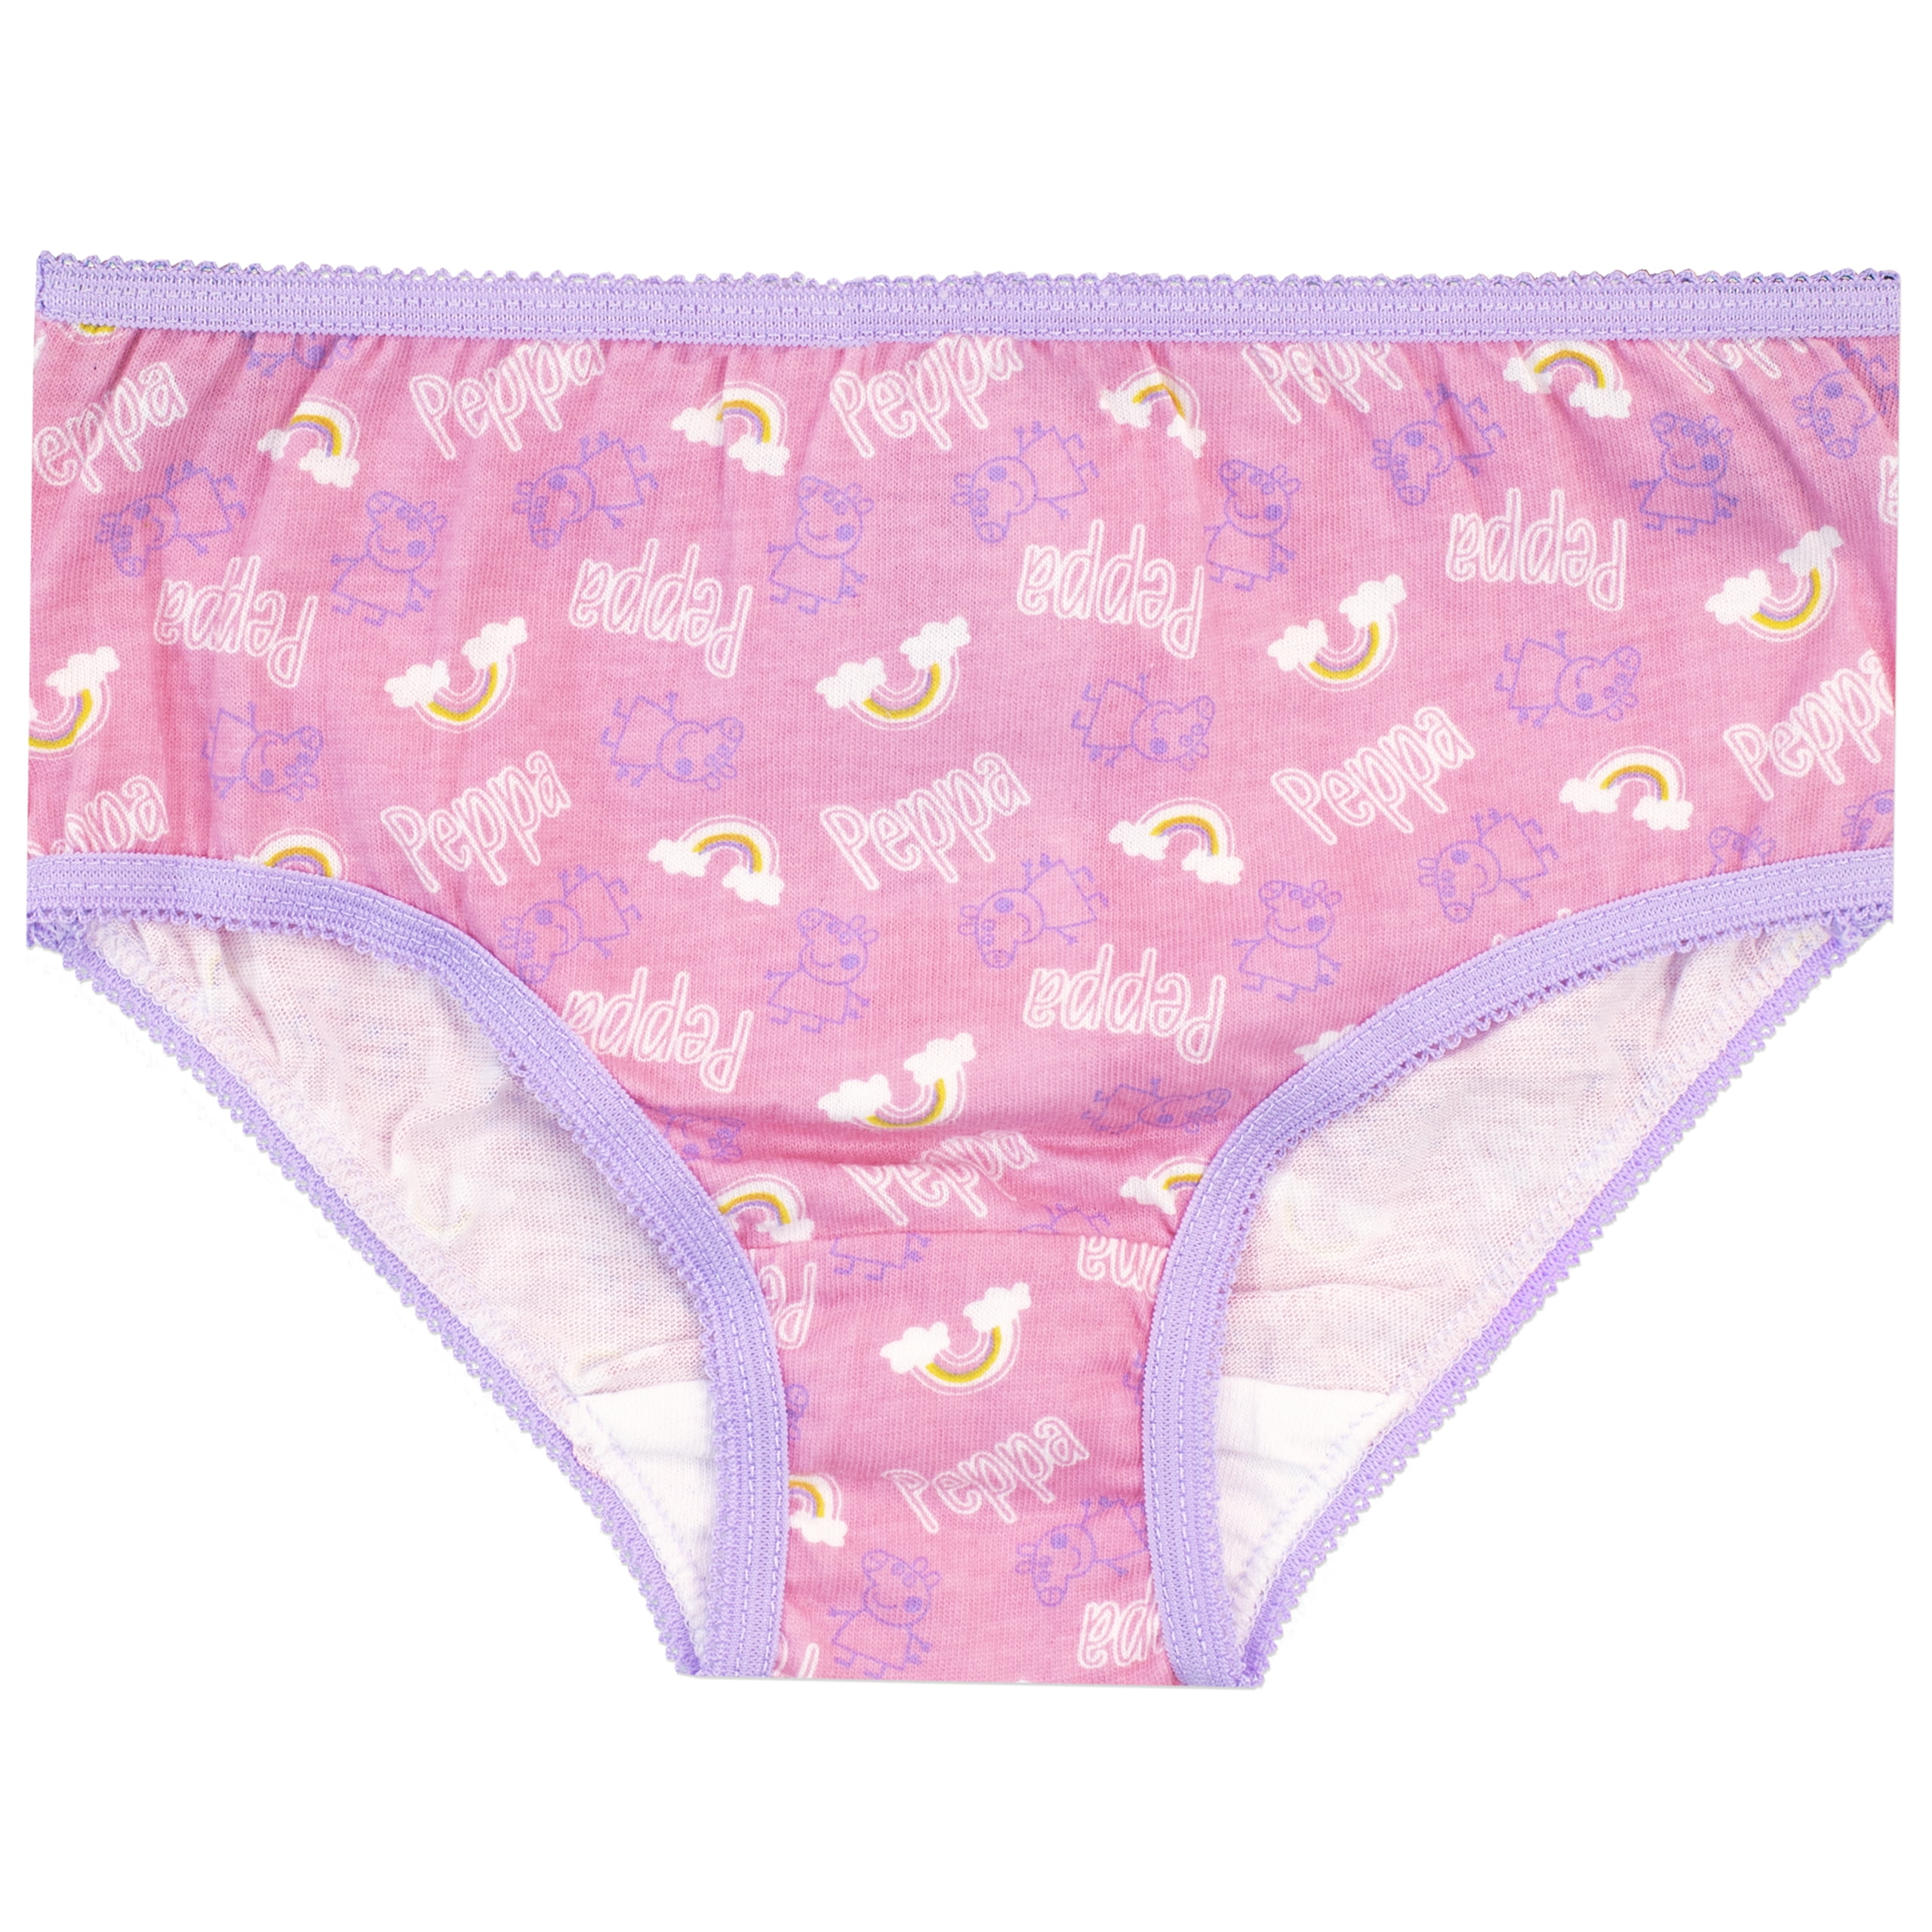 Peppa Pig Toddler Girl Briefs 7-Pack, Sizes 2T-4T UK